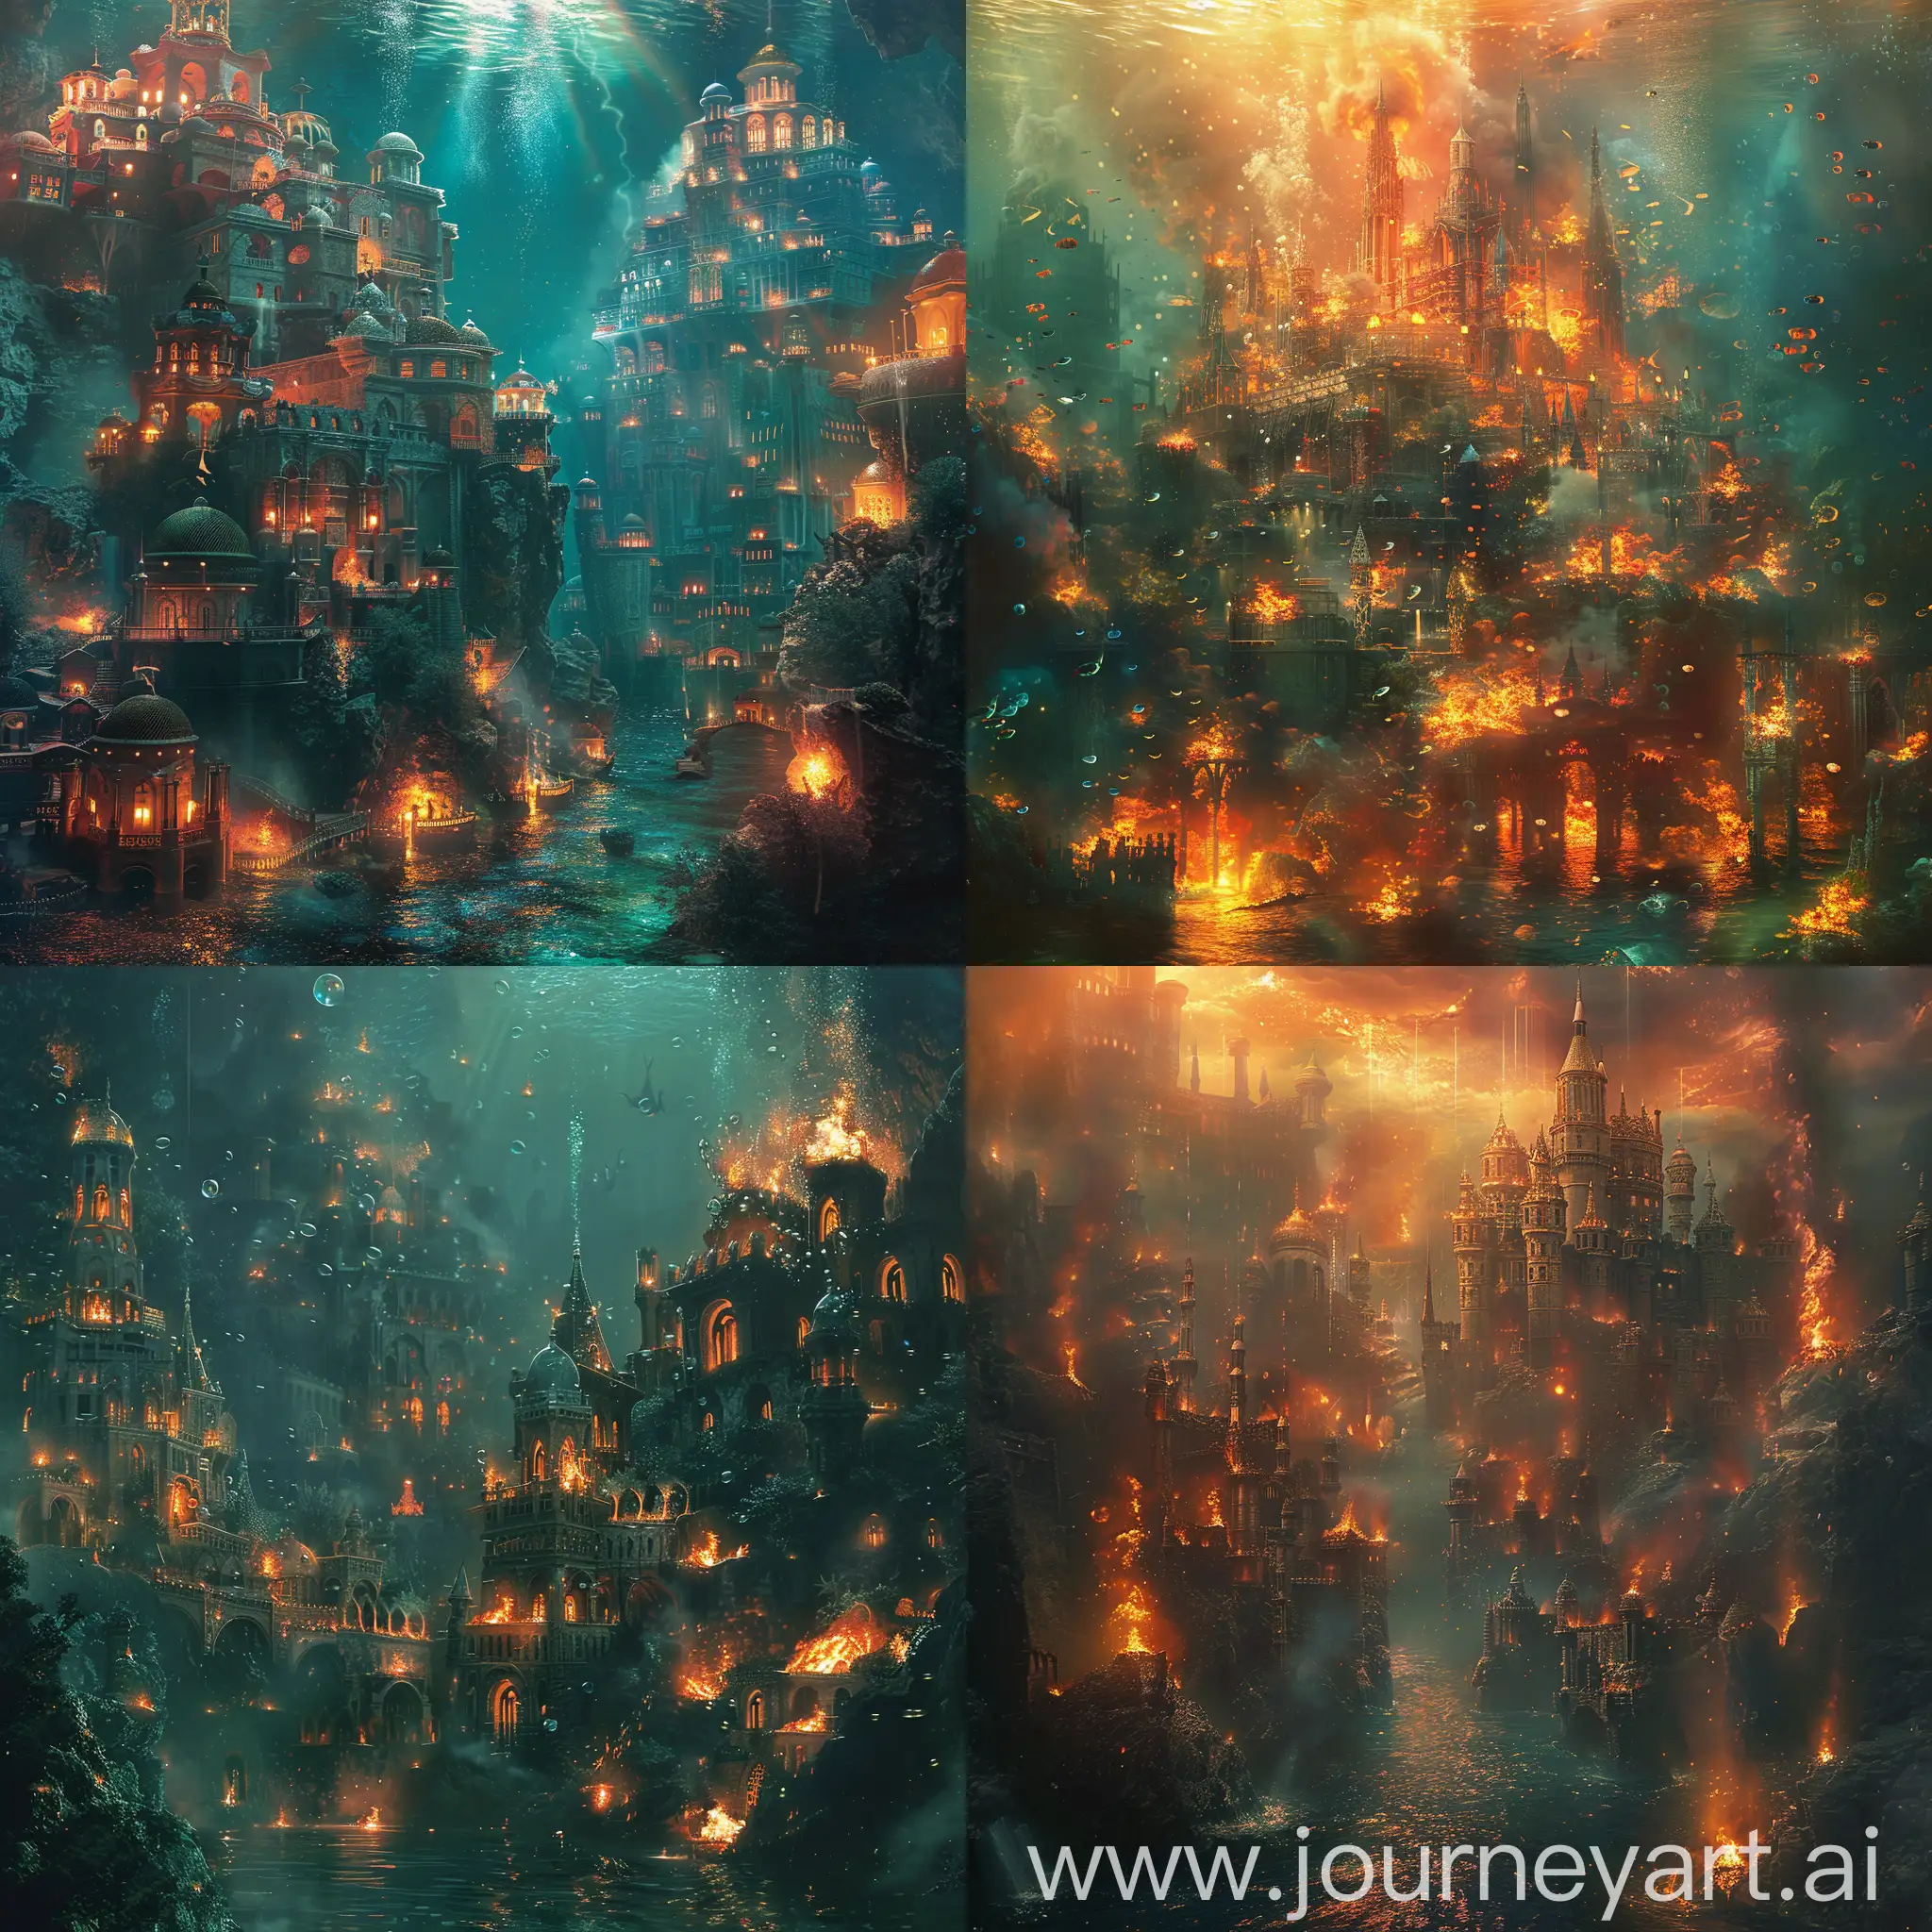 Vibrant-Underwater-Kingdom-in-the-World-of-Fire